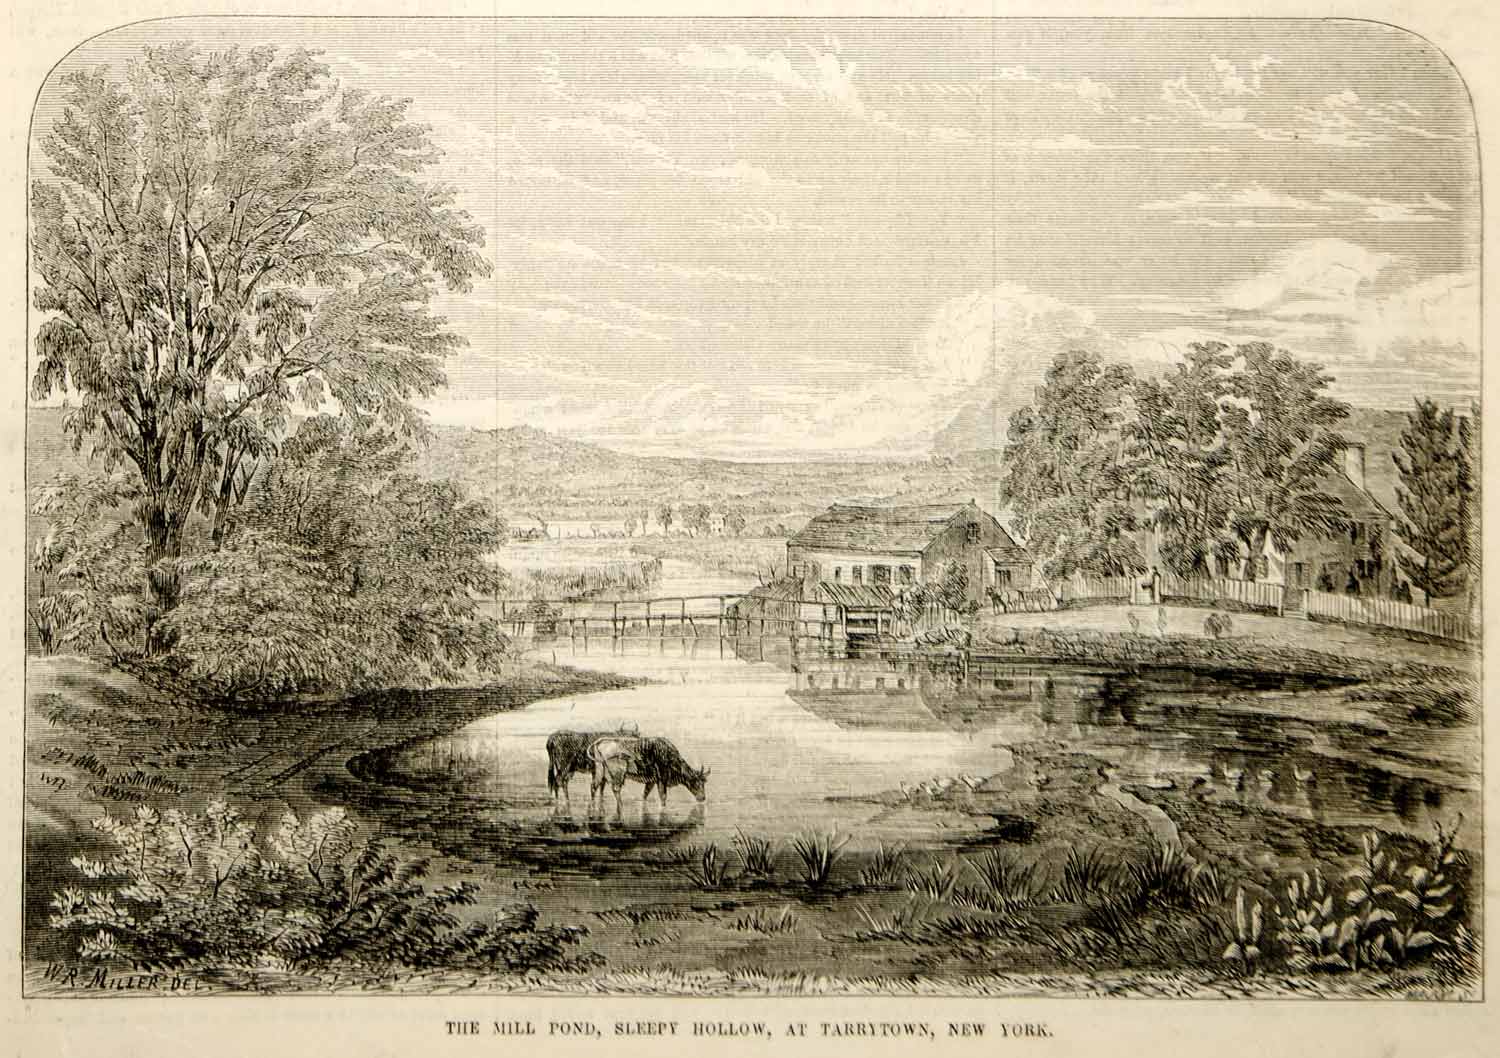 1853 Wood Engraving Mill Pond Sleepy Hollow Tarrytown NY William Rickarby Miller